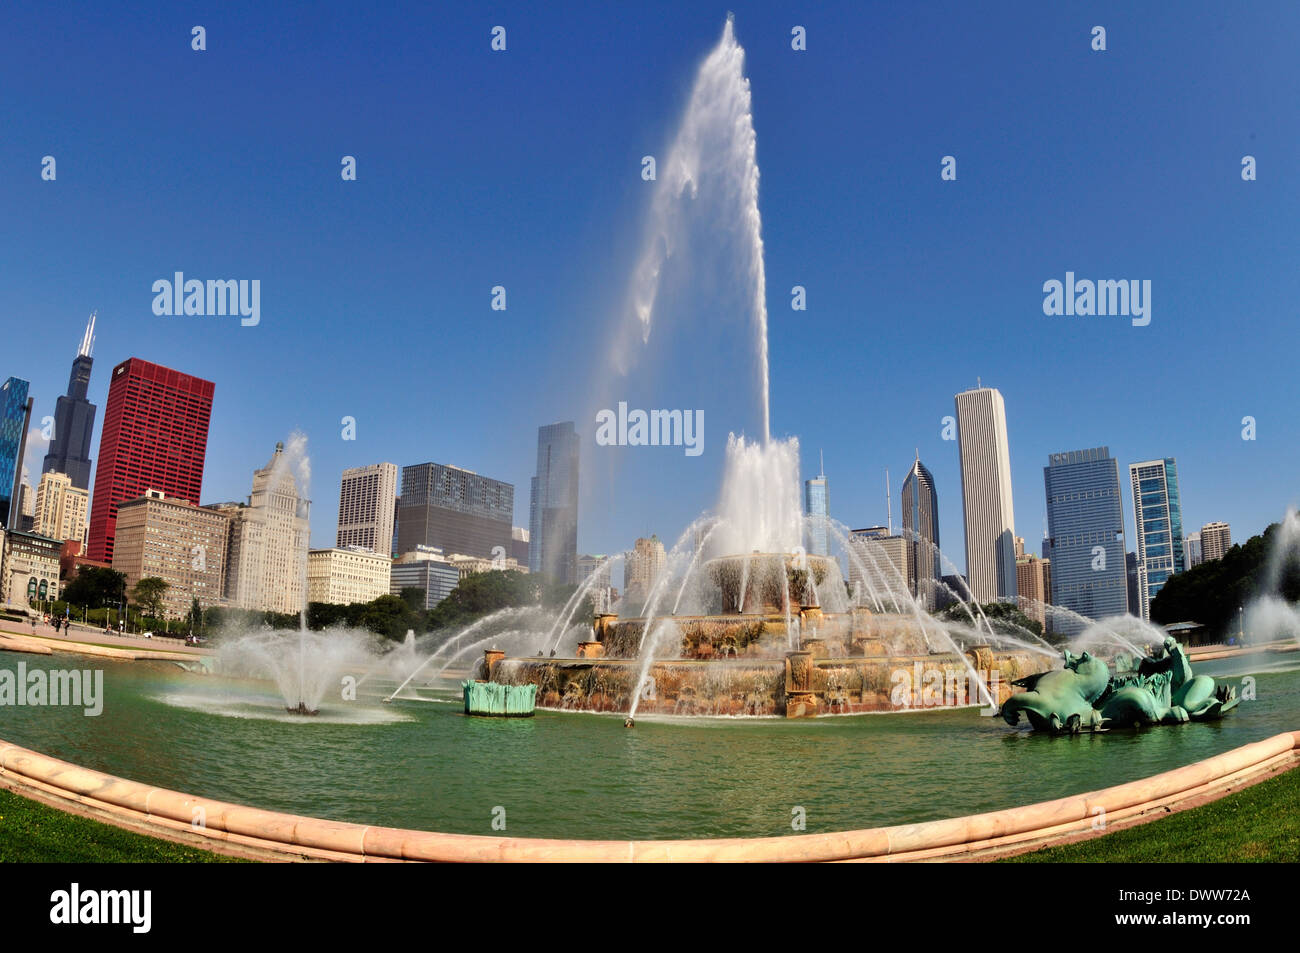 USA Illinois Chicago. Buckingham Fountain city skyline Willis Tower (formerly Sears Tower) CNA Center Chase Bank Building Stock Photo